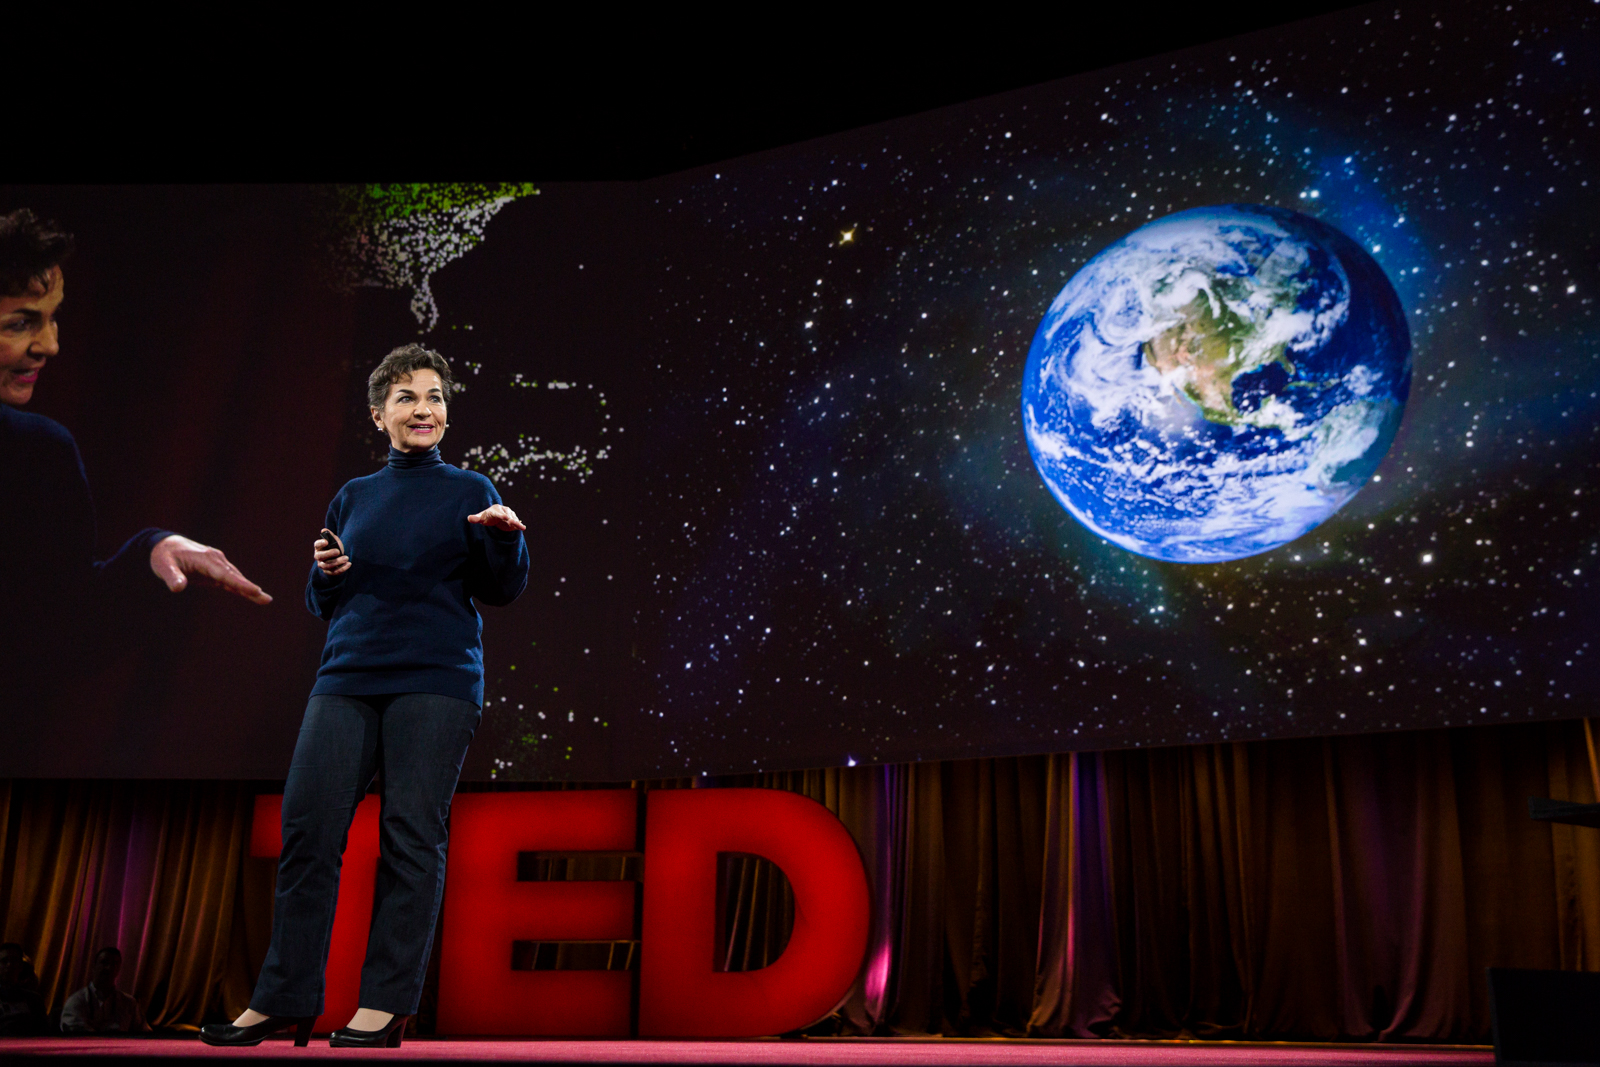 Christiana Figueres speaks at TED2016 - Dream, February 15-19, 2016, Vancouver Convention Center, Vancouver, Canada. Photo: Bret Hartman / TED